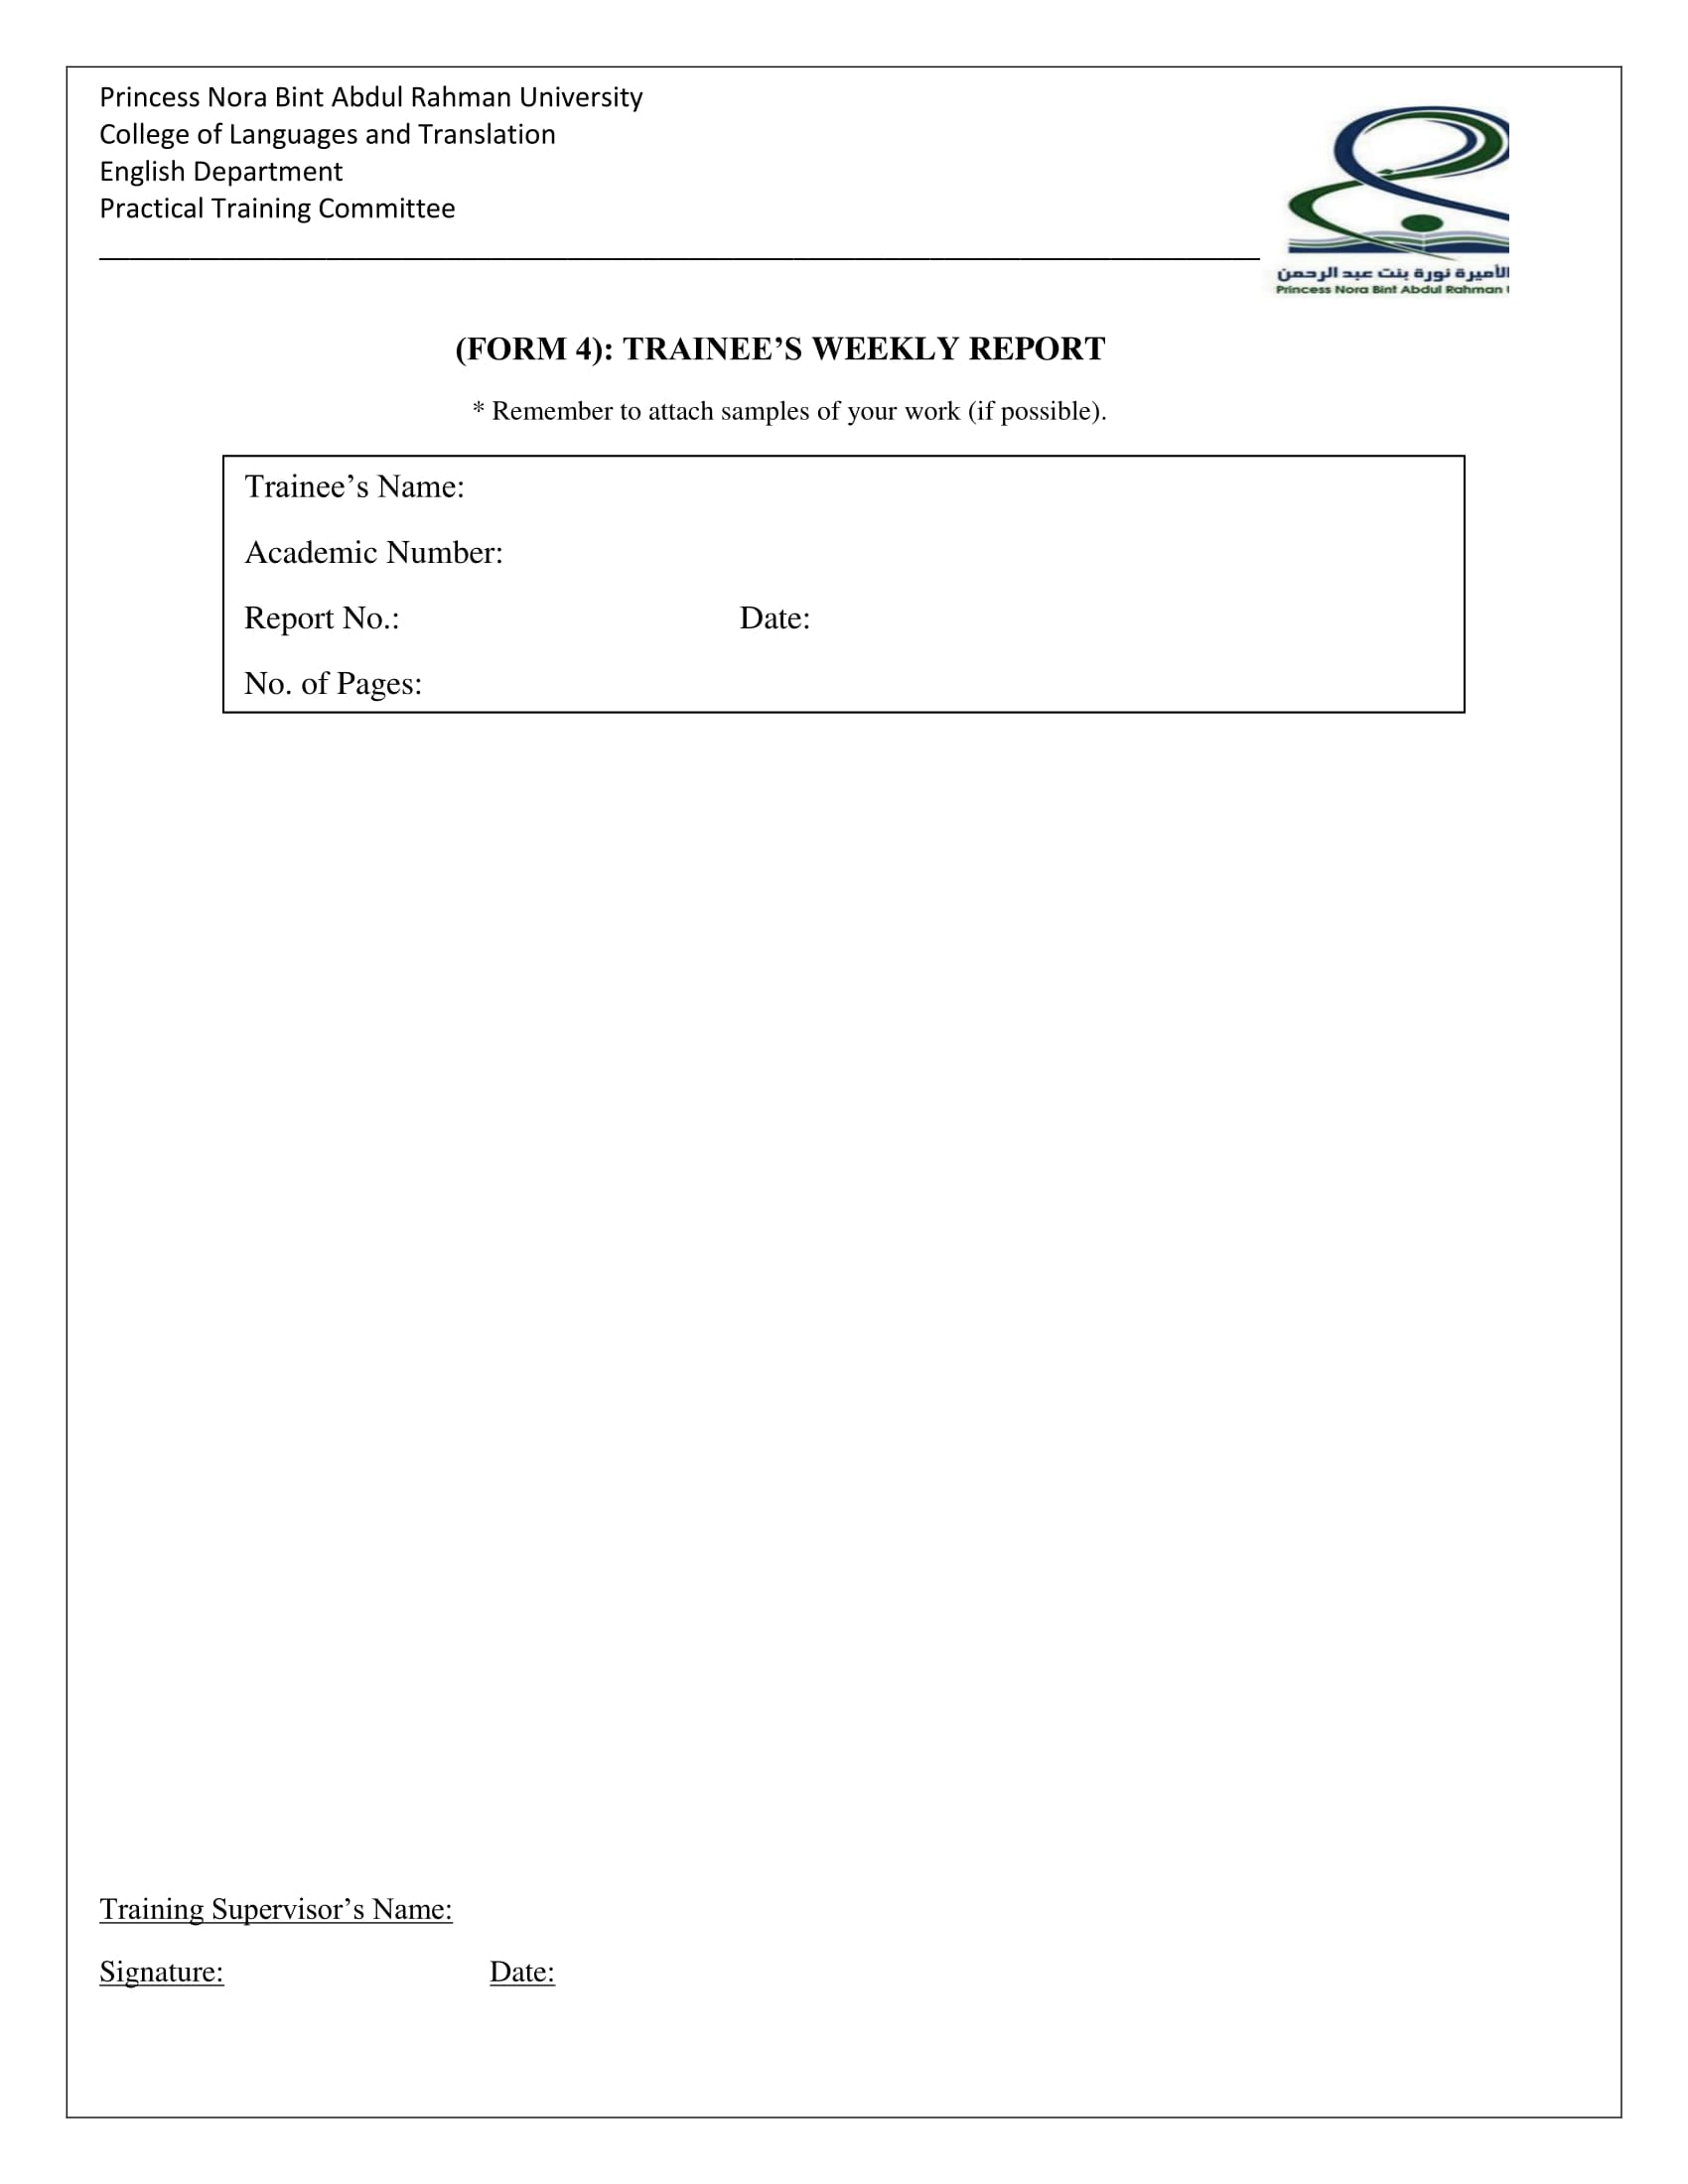 trainee’s weekly report form 1